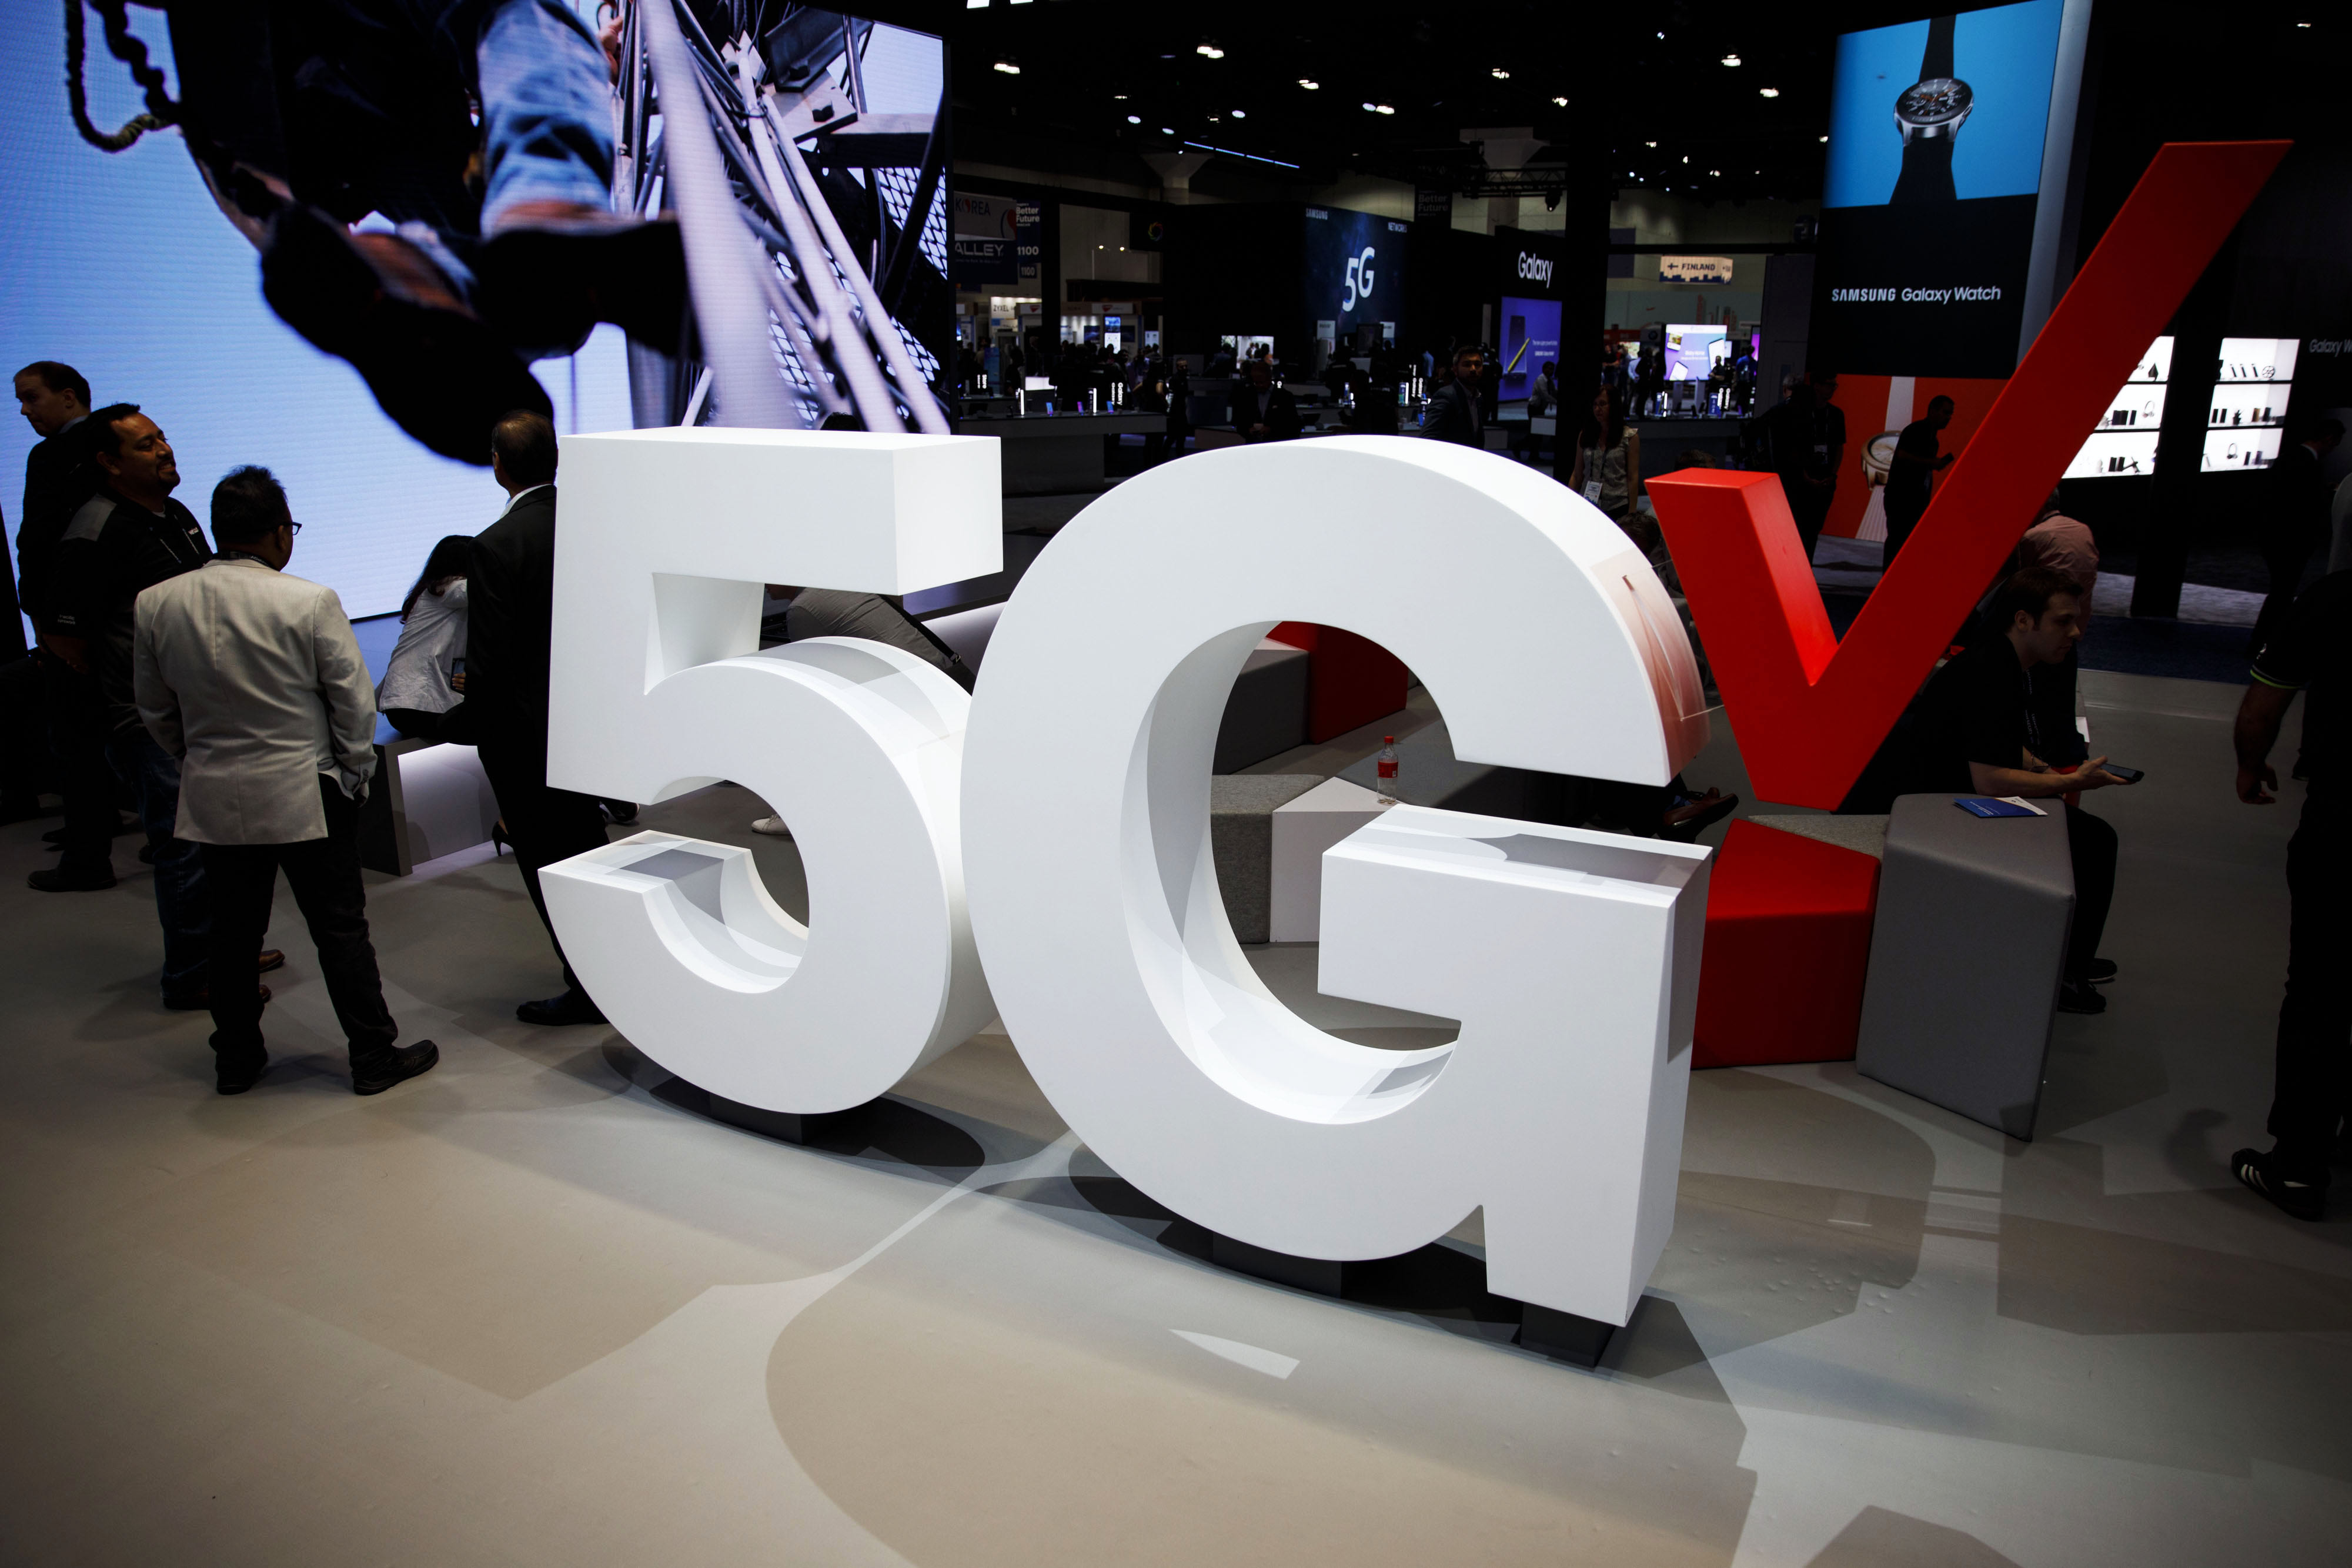 How Verizon’s Will Solve Biggest Problem With 5G Network